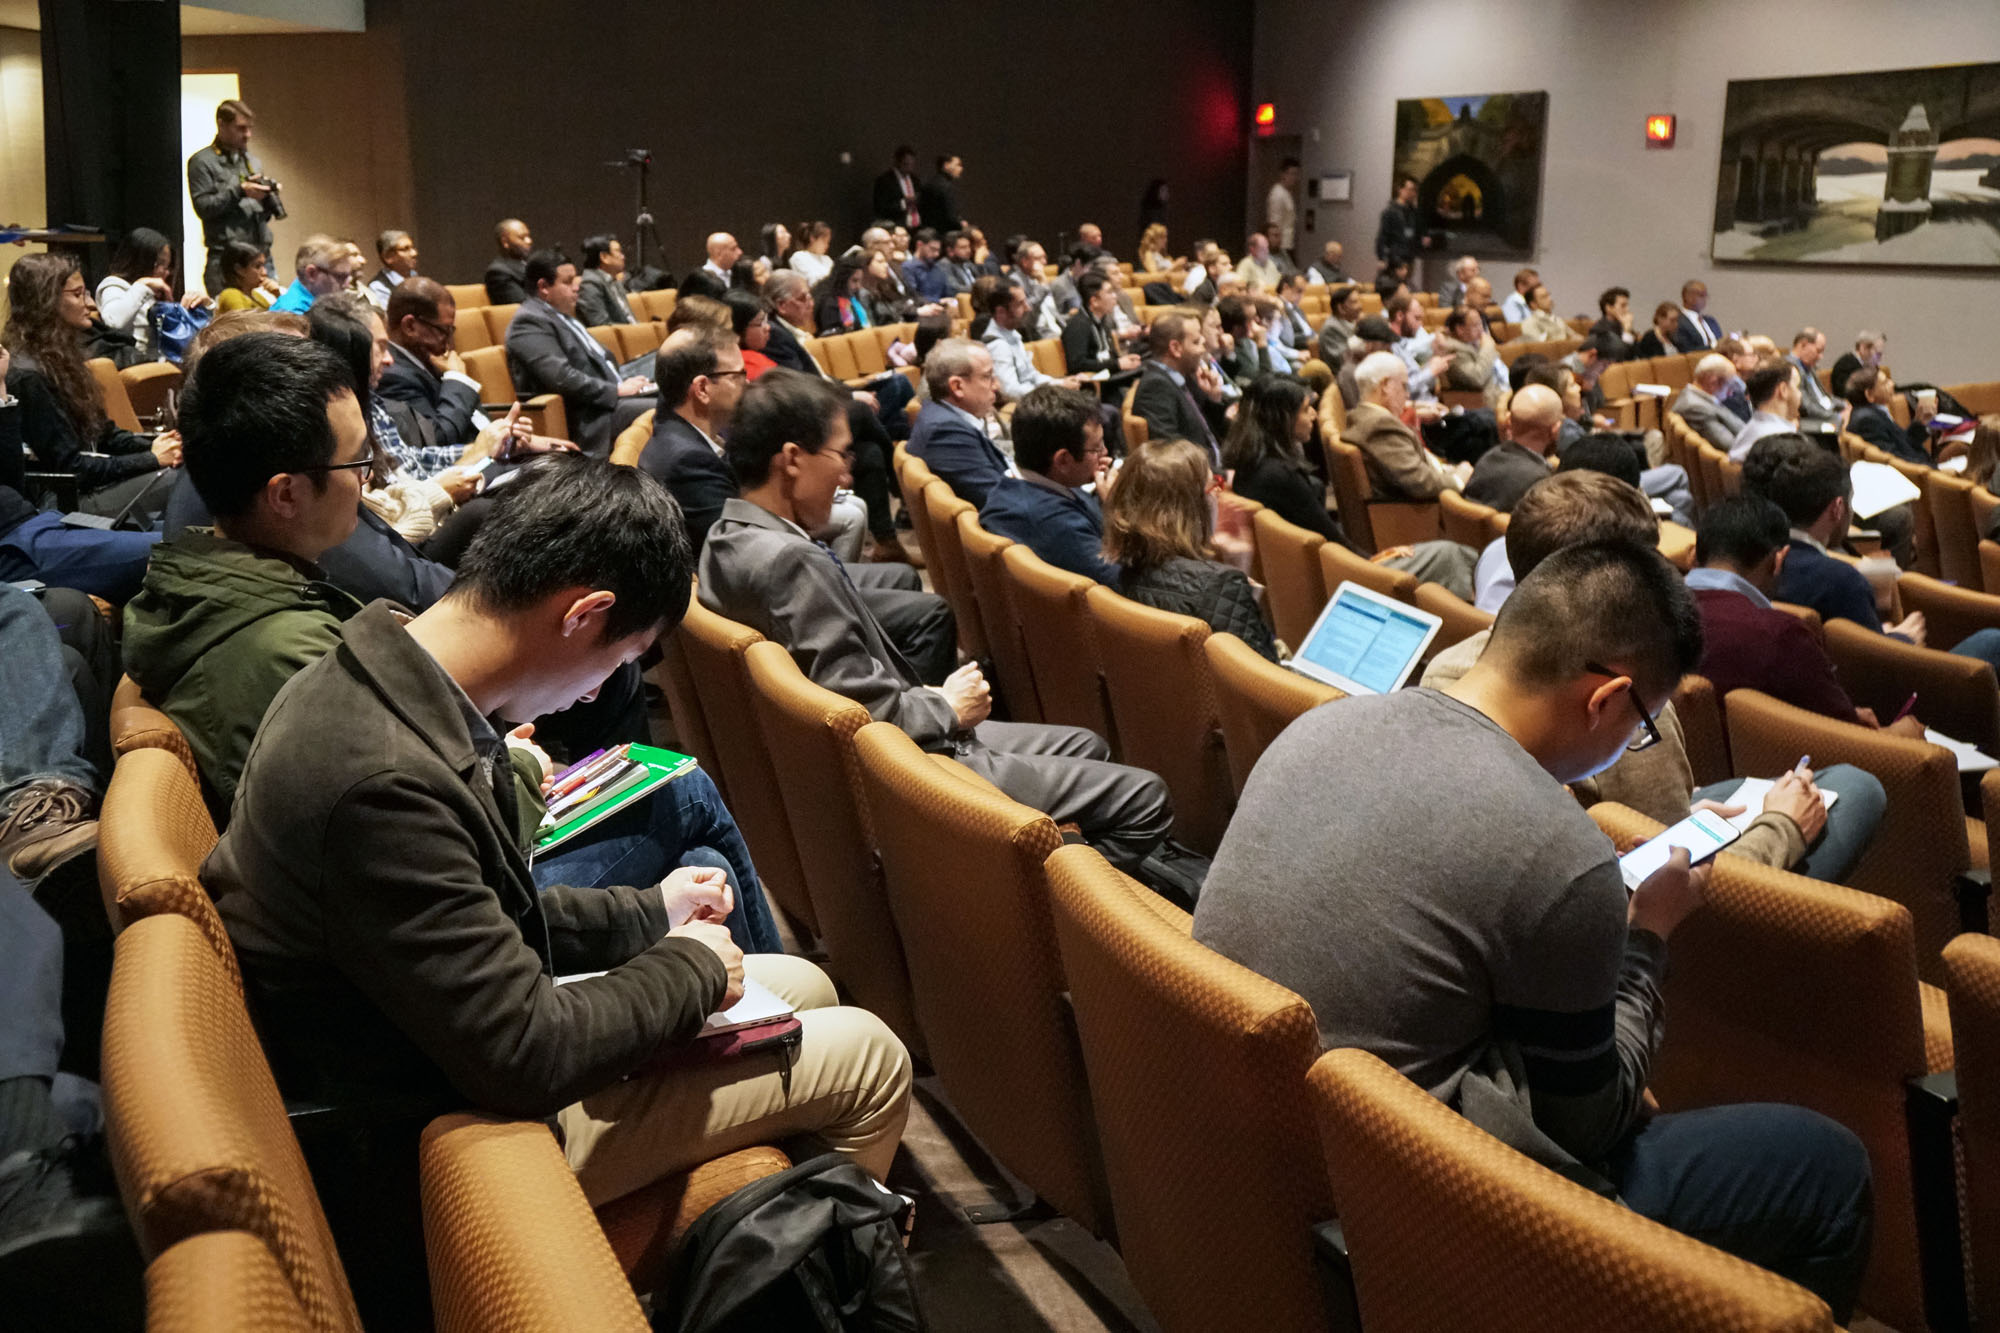 The 6th NYC Symposium on Connected and Autonomous Vehicles, hosted by the C2SMART Center, attracted about 200 participants to the NYU Tandon School of Engineering for speakers, panels and discussion on the impacts of real-world deployment of CAVs.